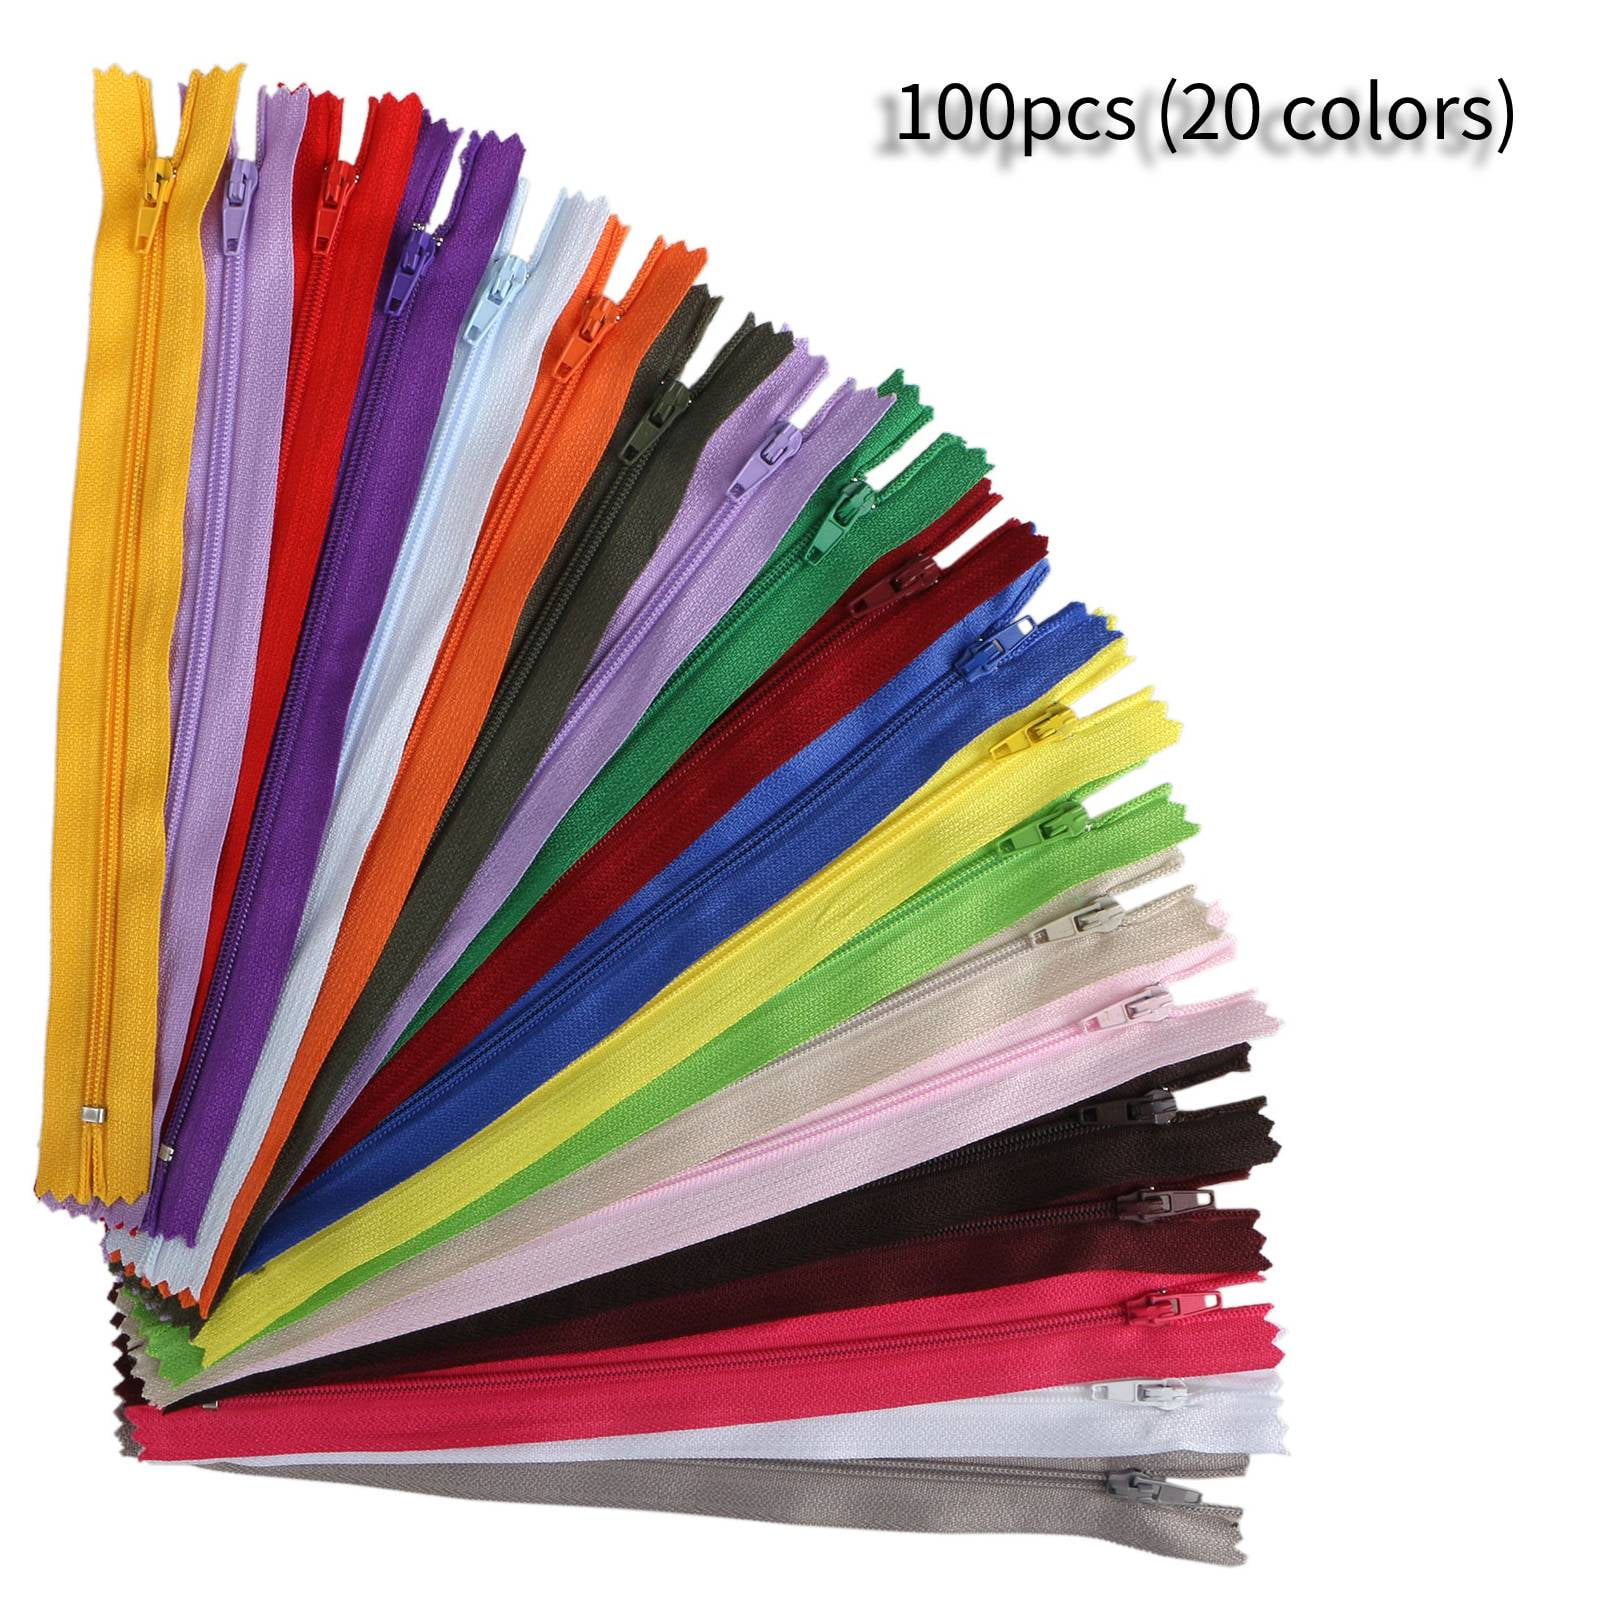 Yaka 60pcs 9 inch Nylon Coil Zippers Sewing Zippers for Tailor Sewing Crafts (20 Color)